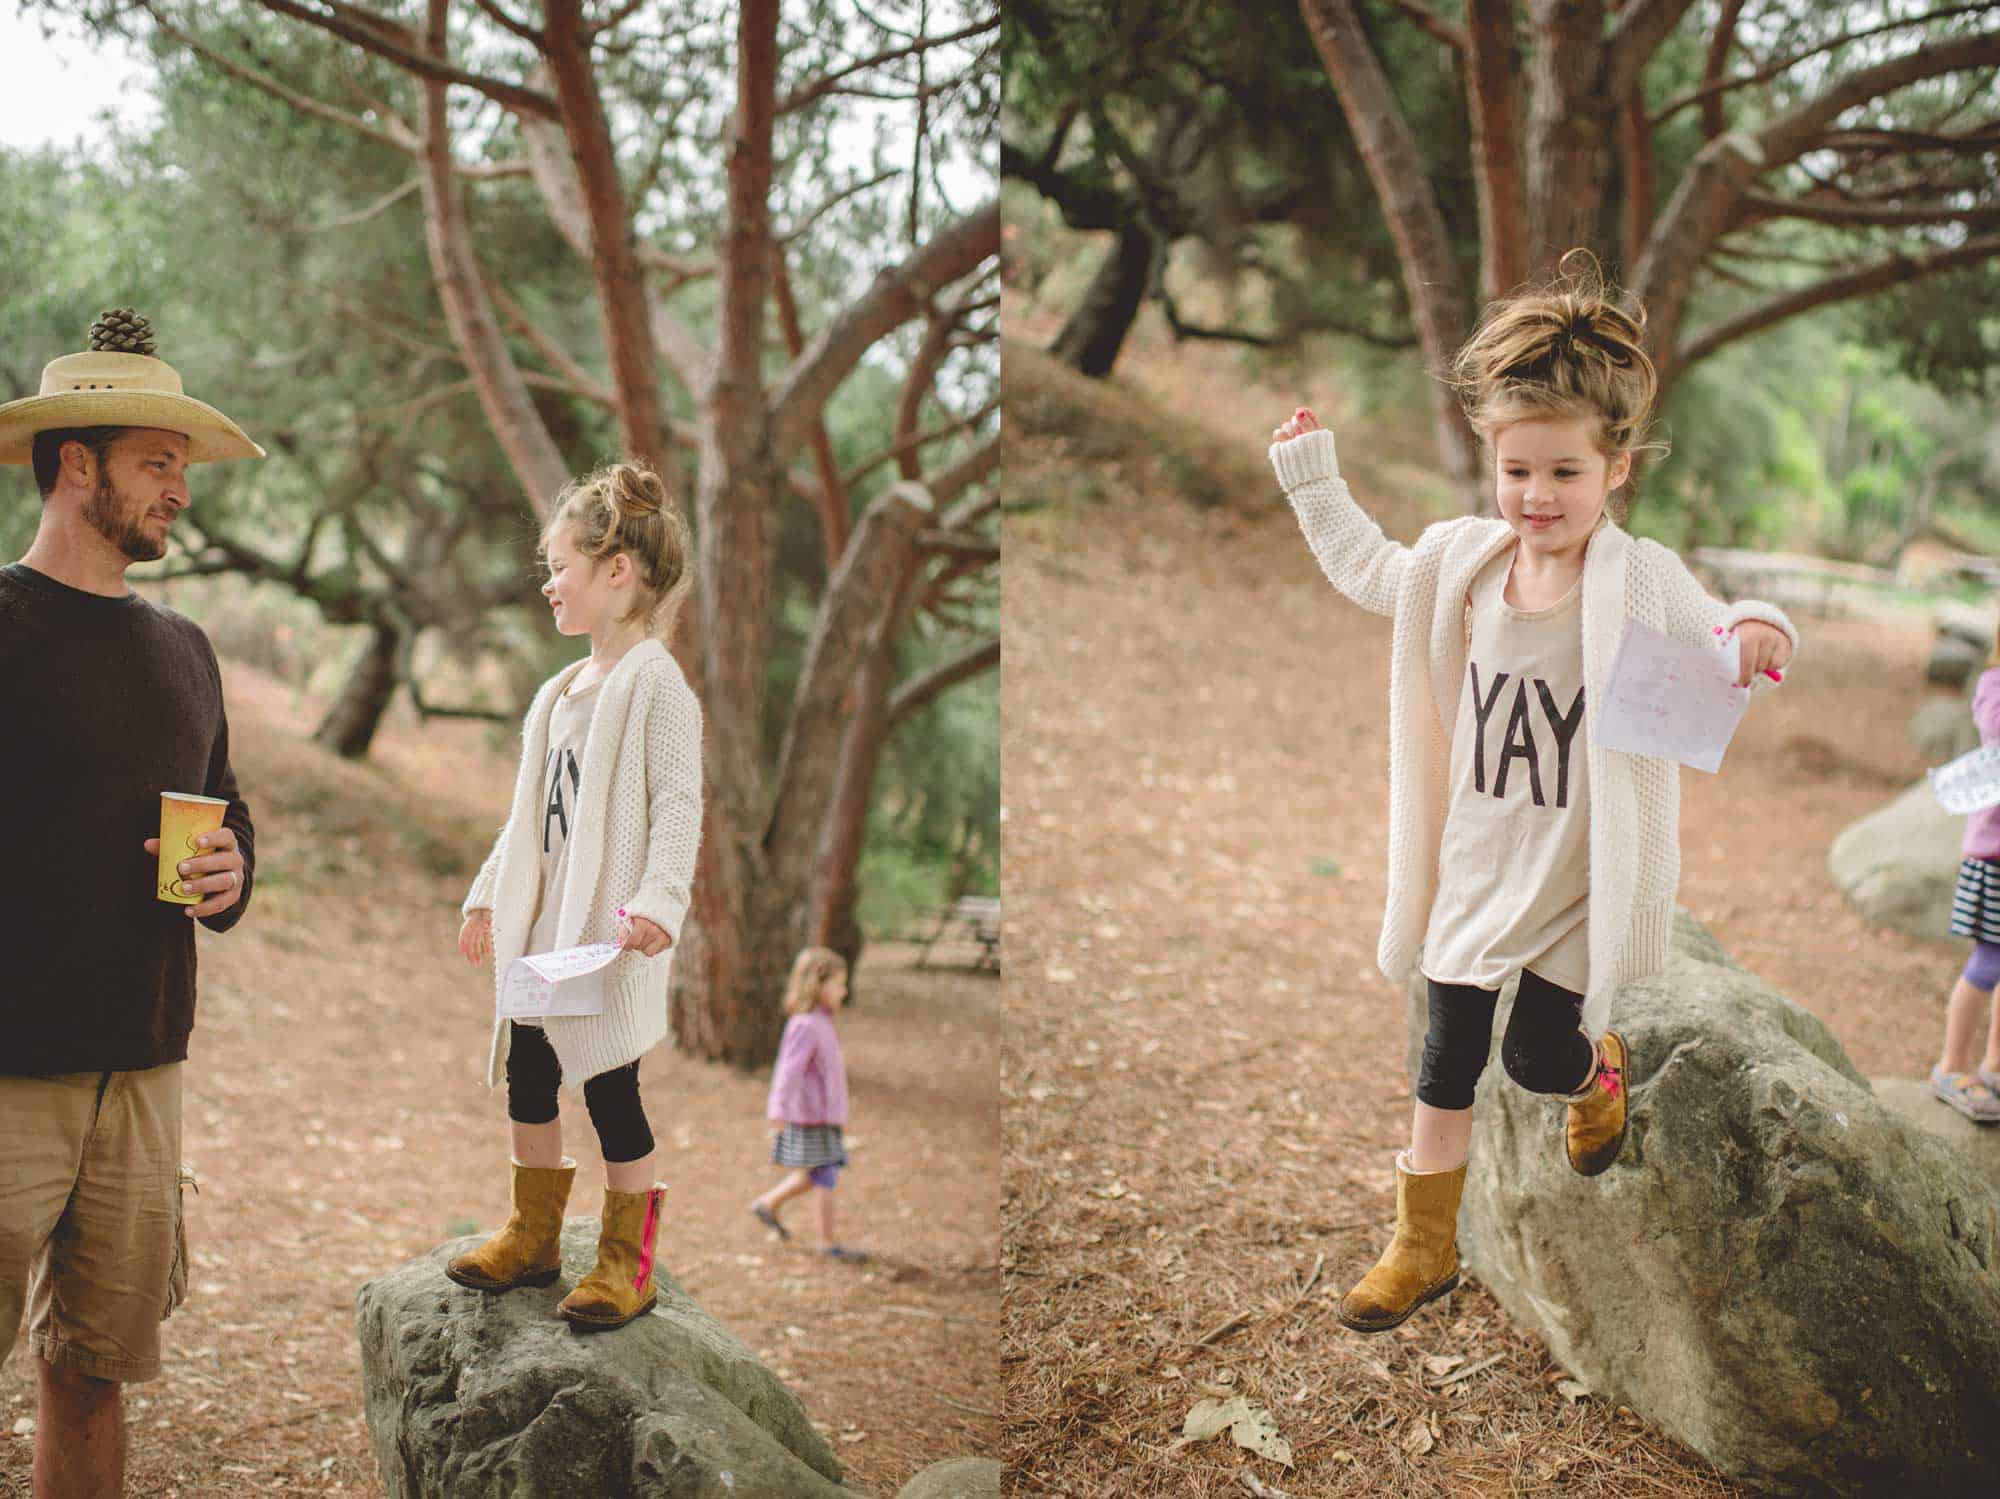 Goin’ On A Hunt by Tiffani Thiessen • Photography by Rebecca Sanabria